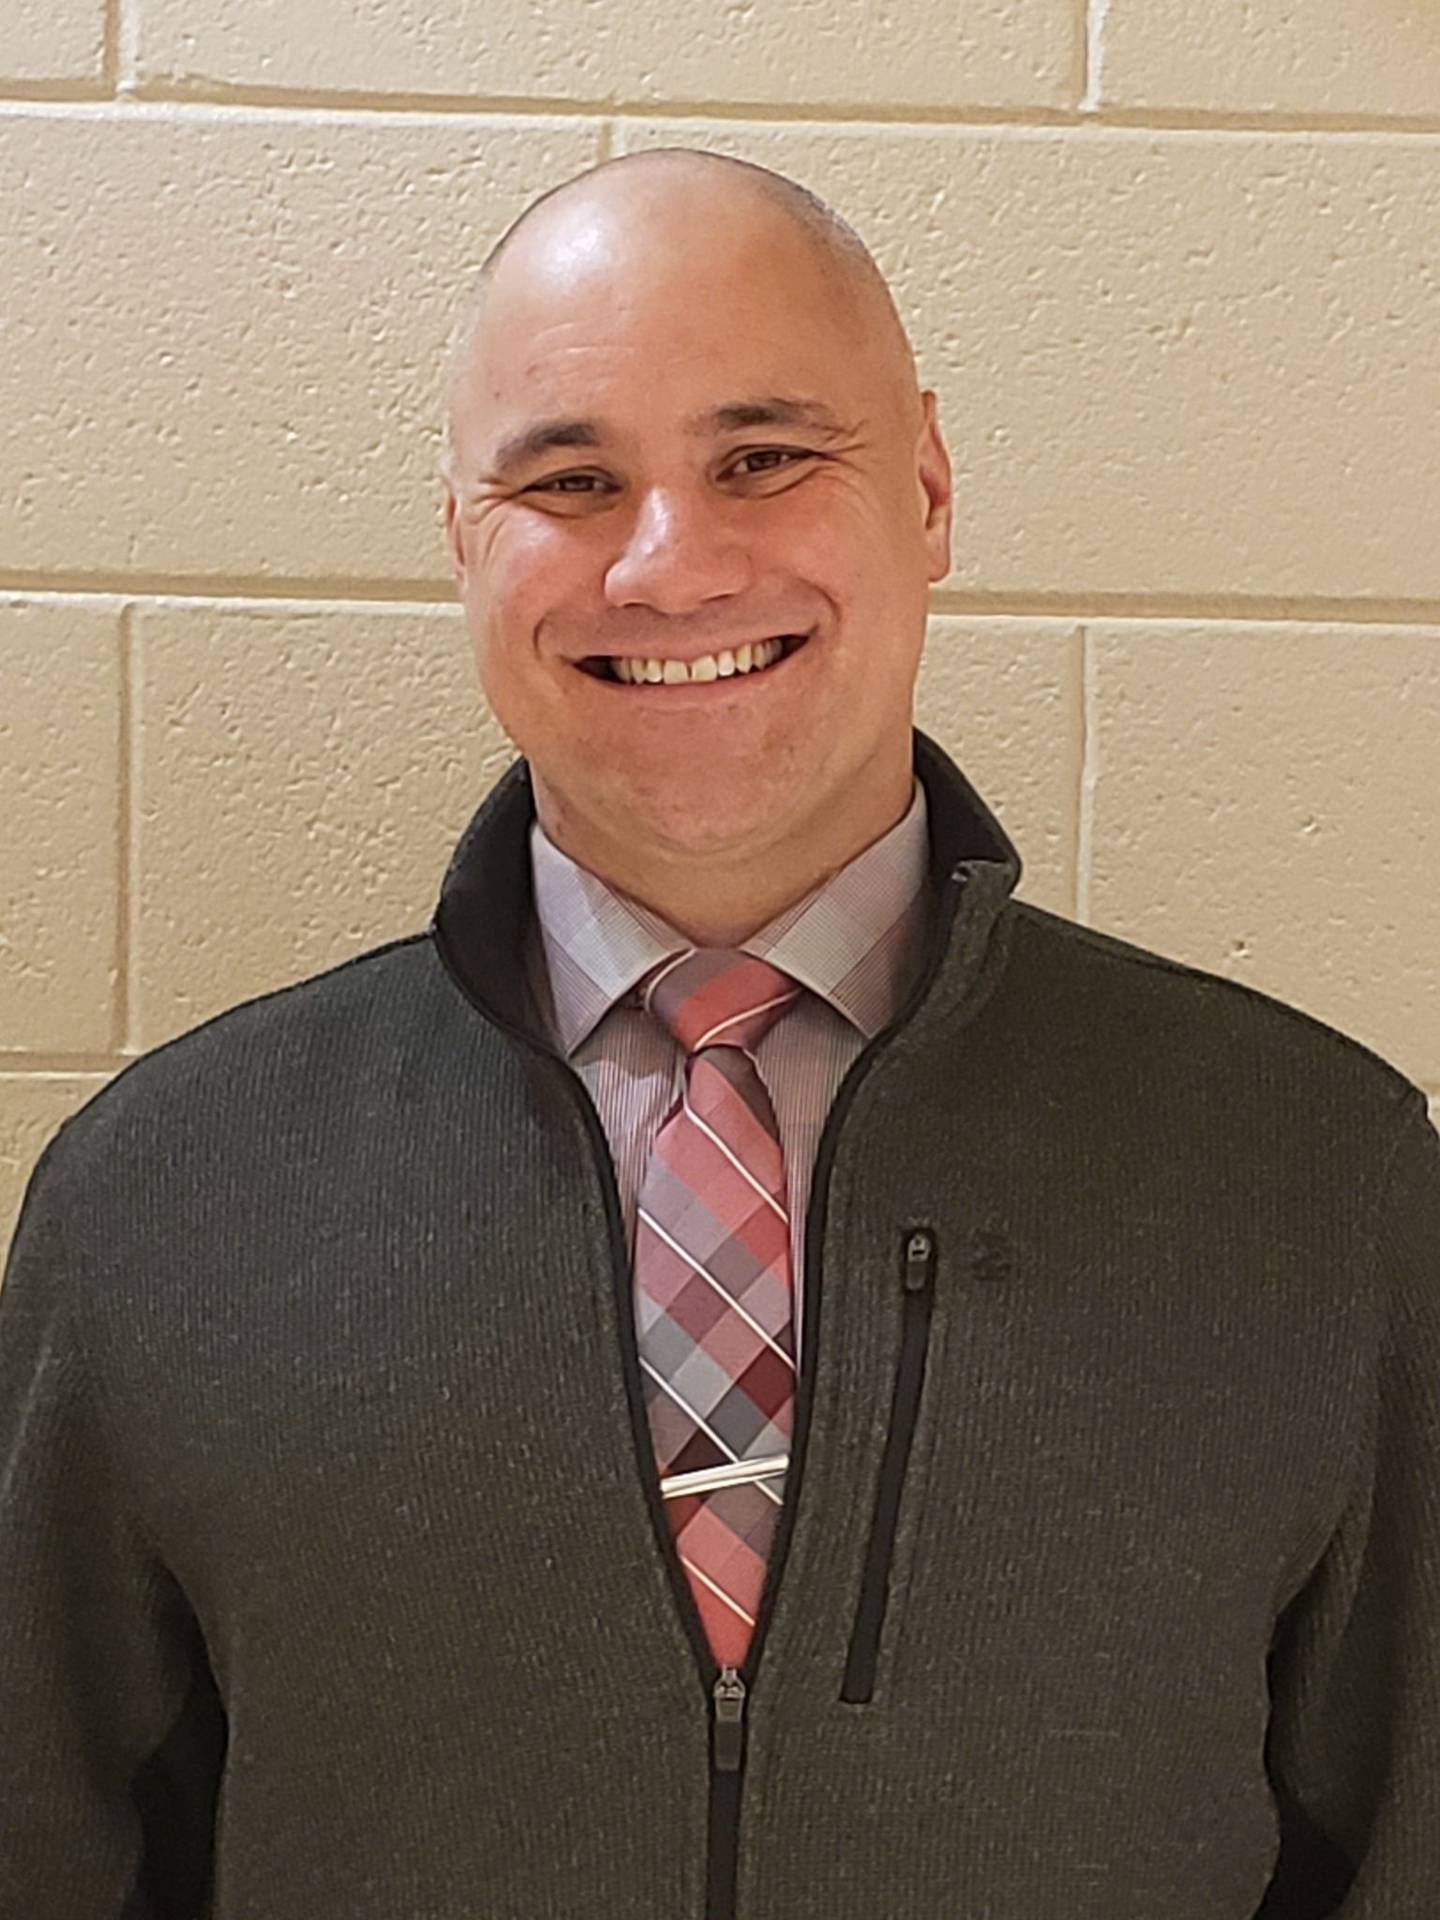 Ryan Schlott will serve as the new district technology administrator for District 202 in Plainfield. Schlott is currently the assistant technology administrator/manager of information services.